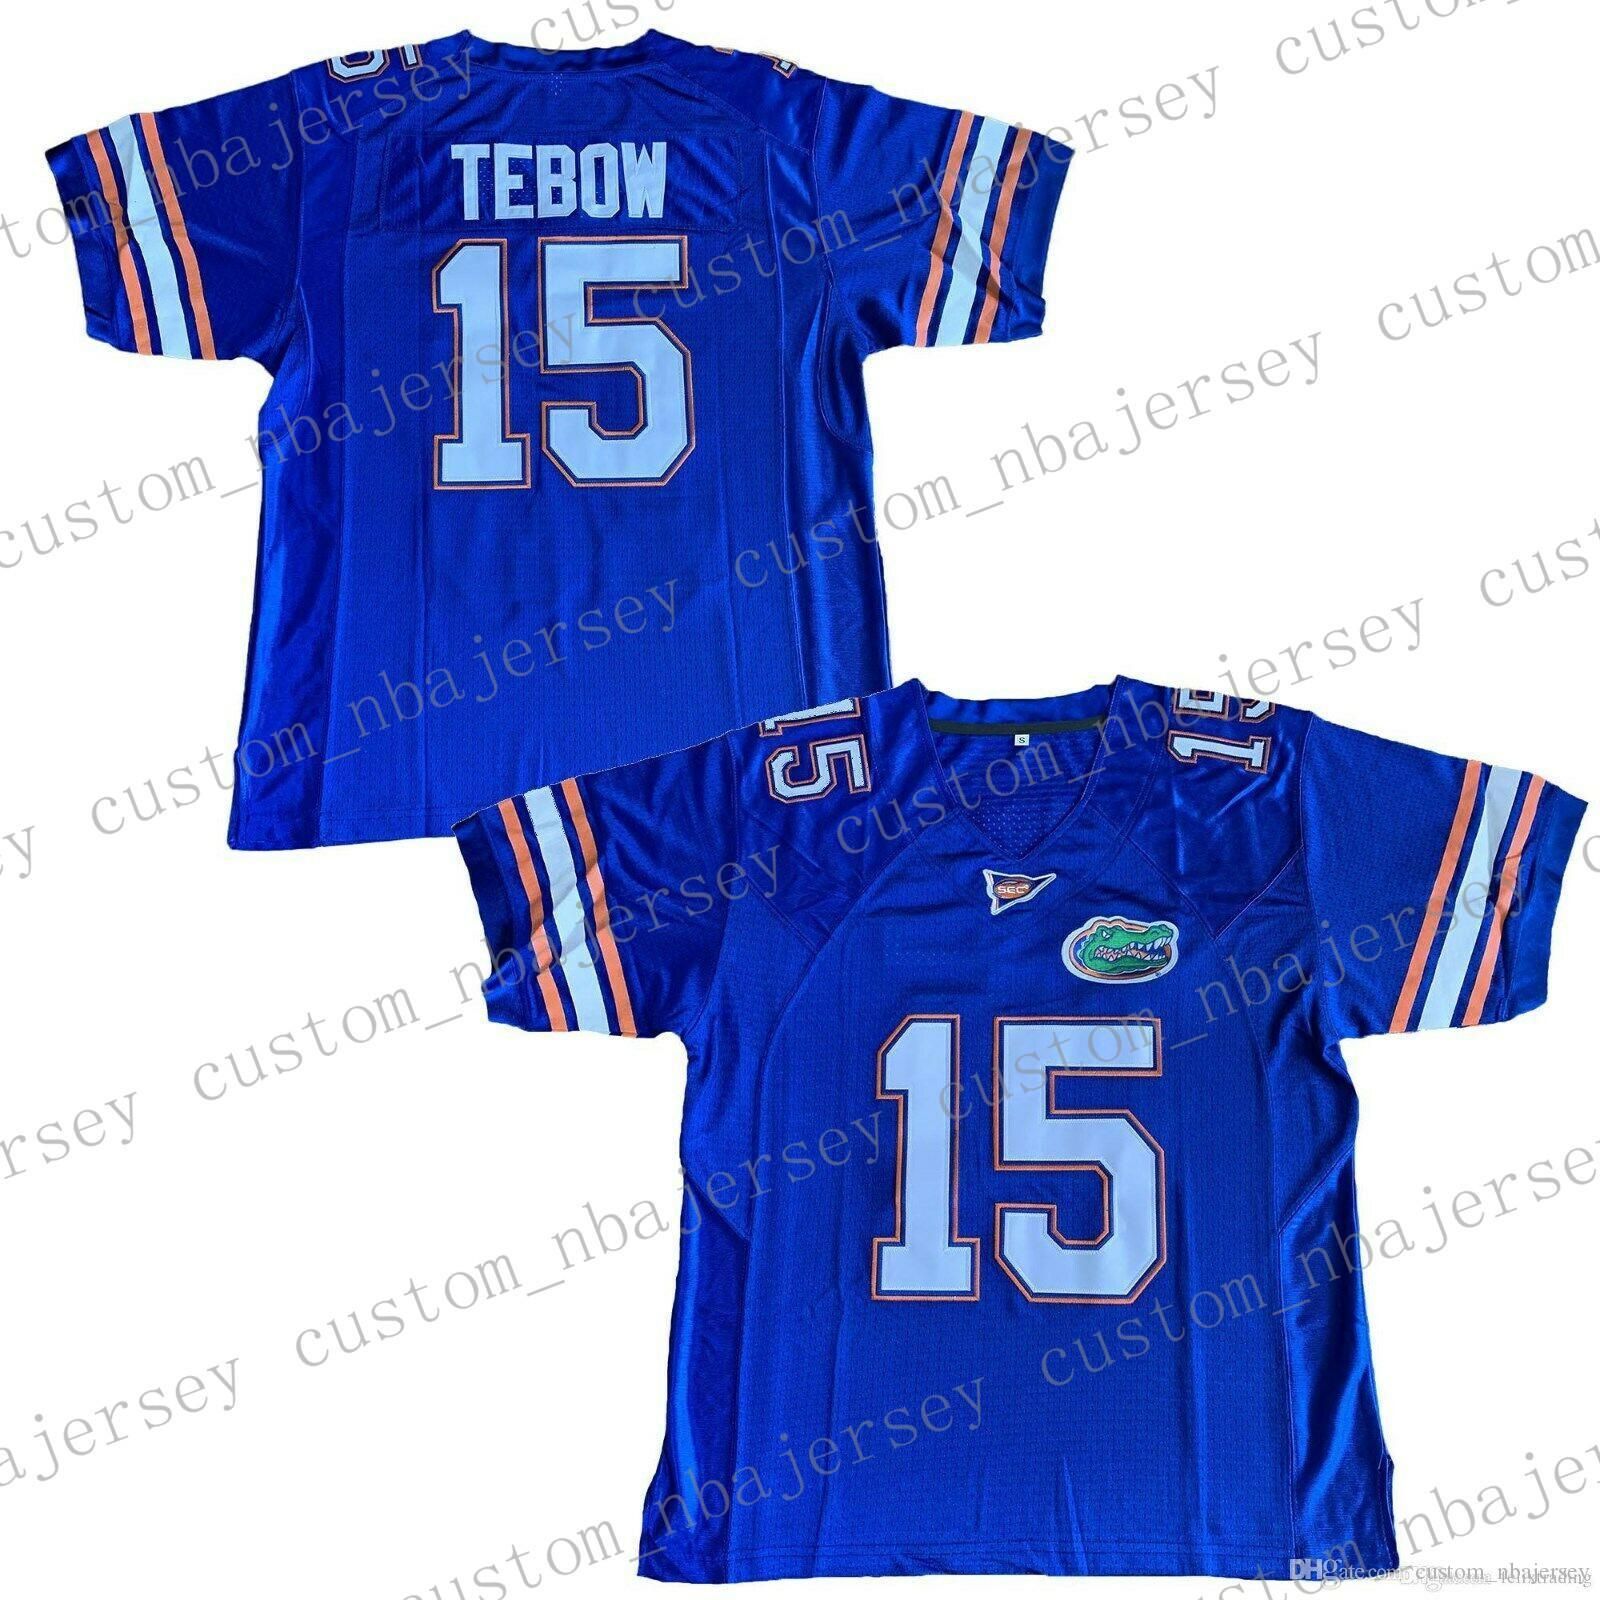 where can i buy a tim tebow jersey